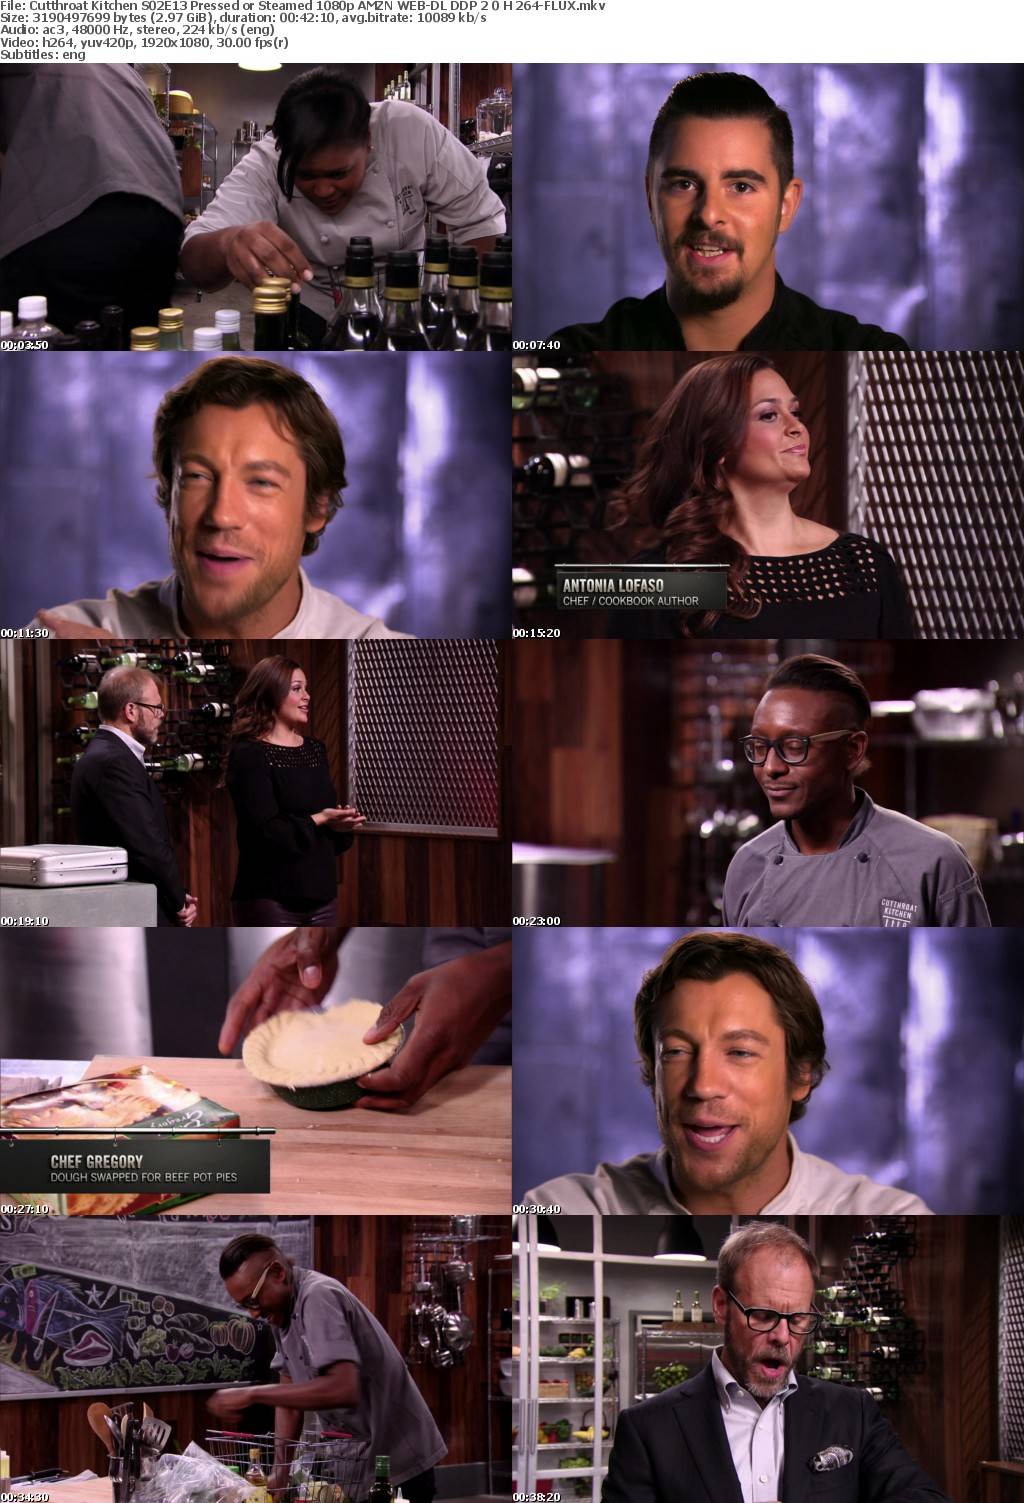 Cutthroat Kitchen S02E13 Pressed or Steamed 1080p AMZN WEB-DL DDP 2 0 H 264-FLUX